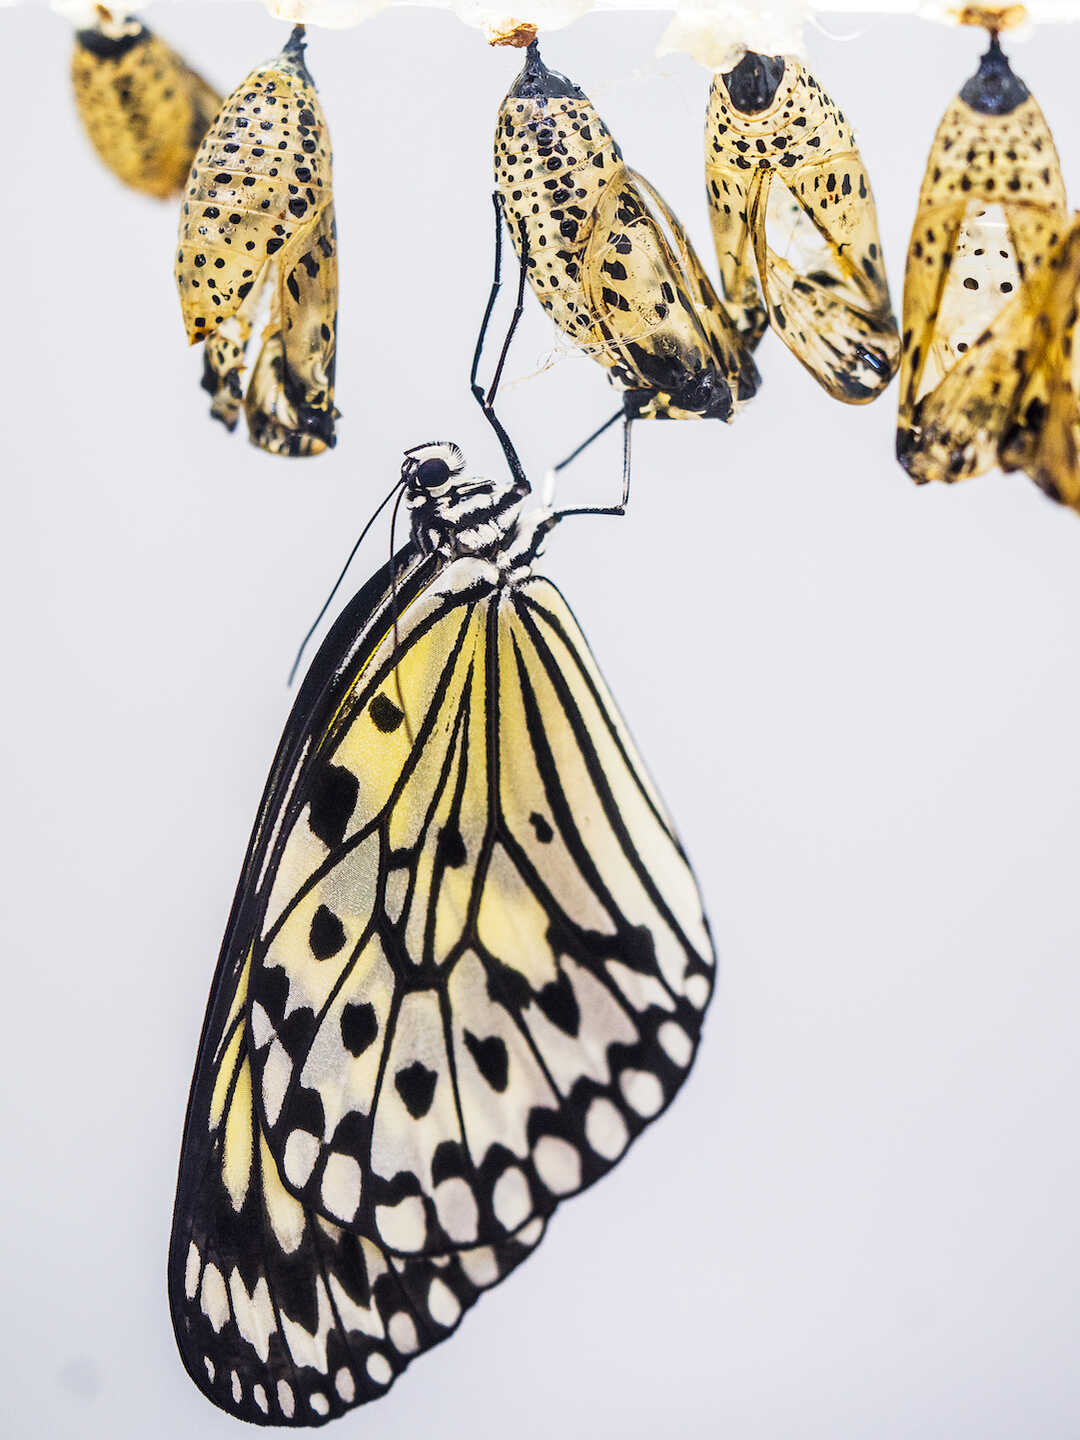 A black, yellow, and white butterfly hangs down from a chrysalis in Osher Rainforest against a white backdrop. 